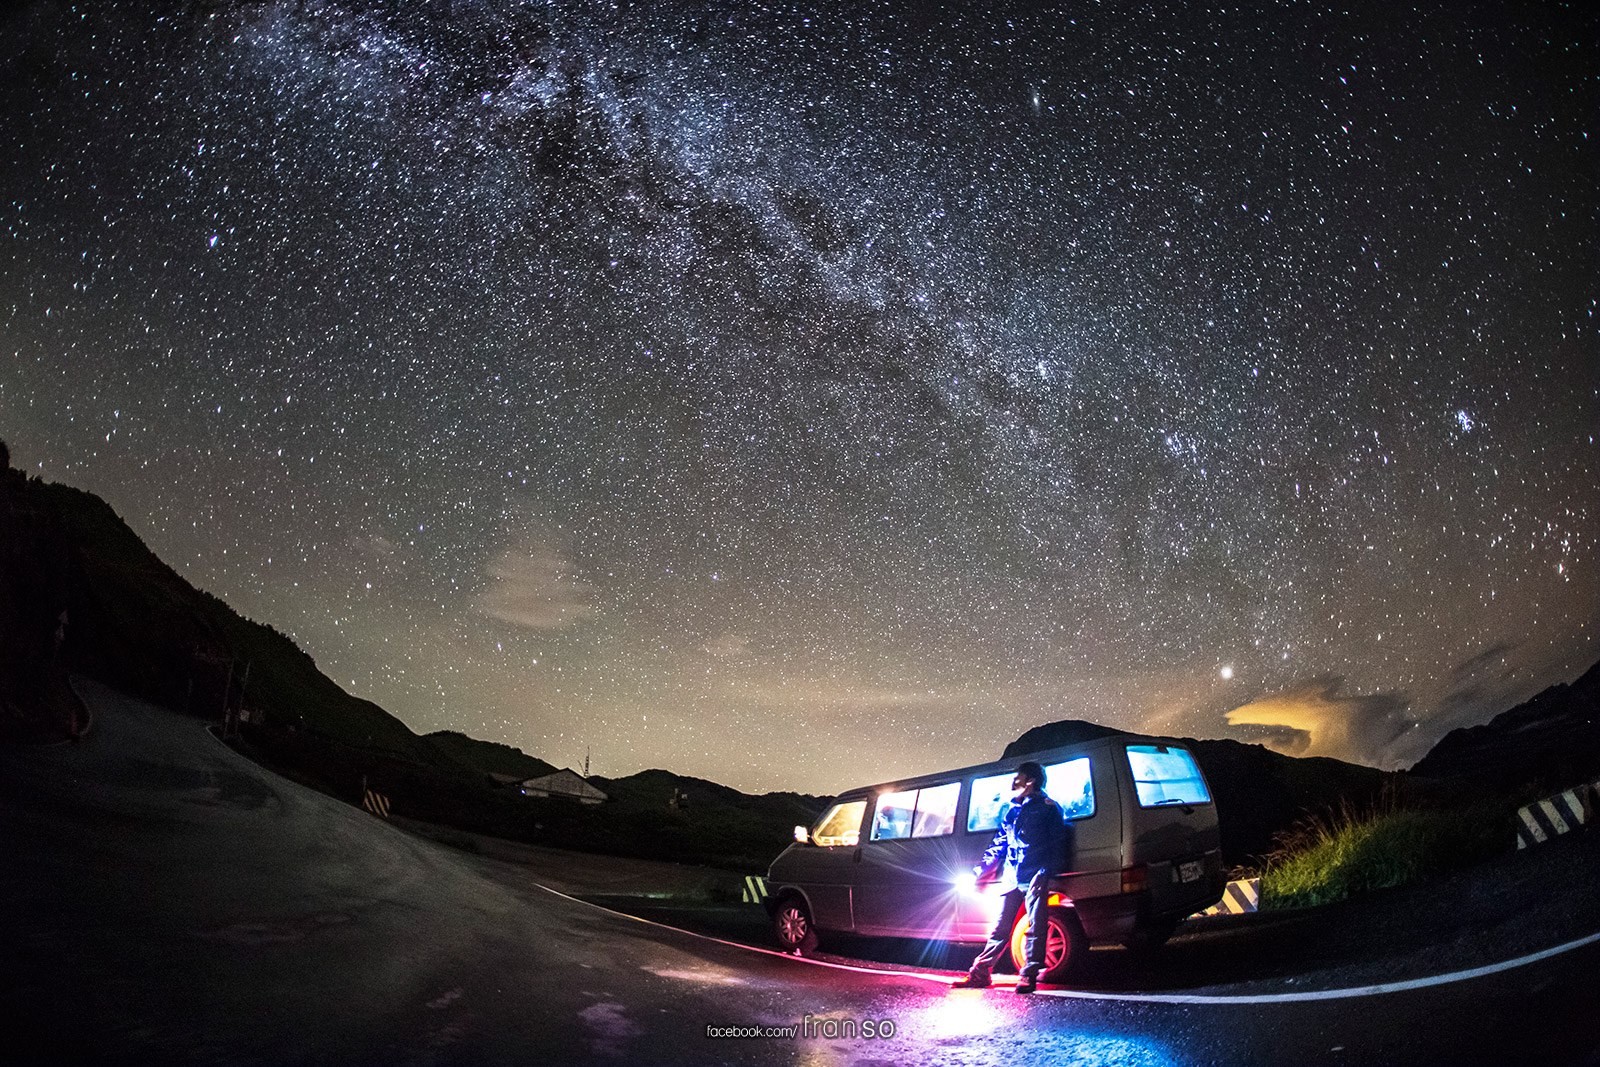 Starscape and Milkyway | Taiwan | Traveler  | Oversea timelapse workshop at CingJing